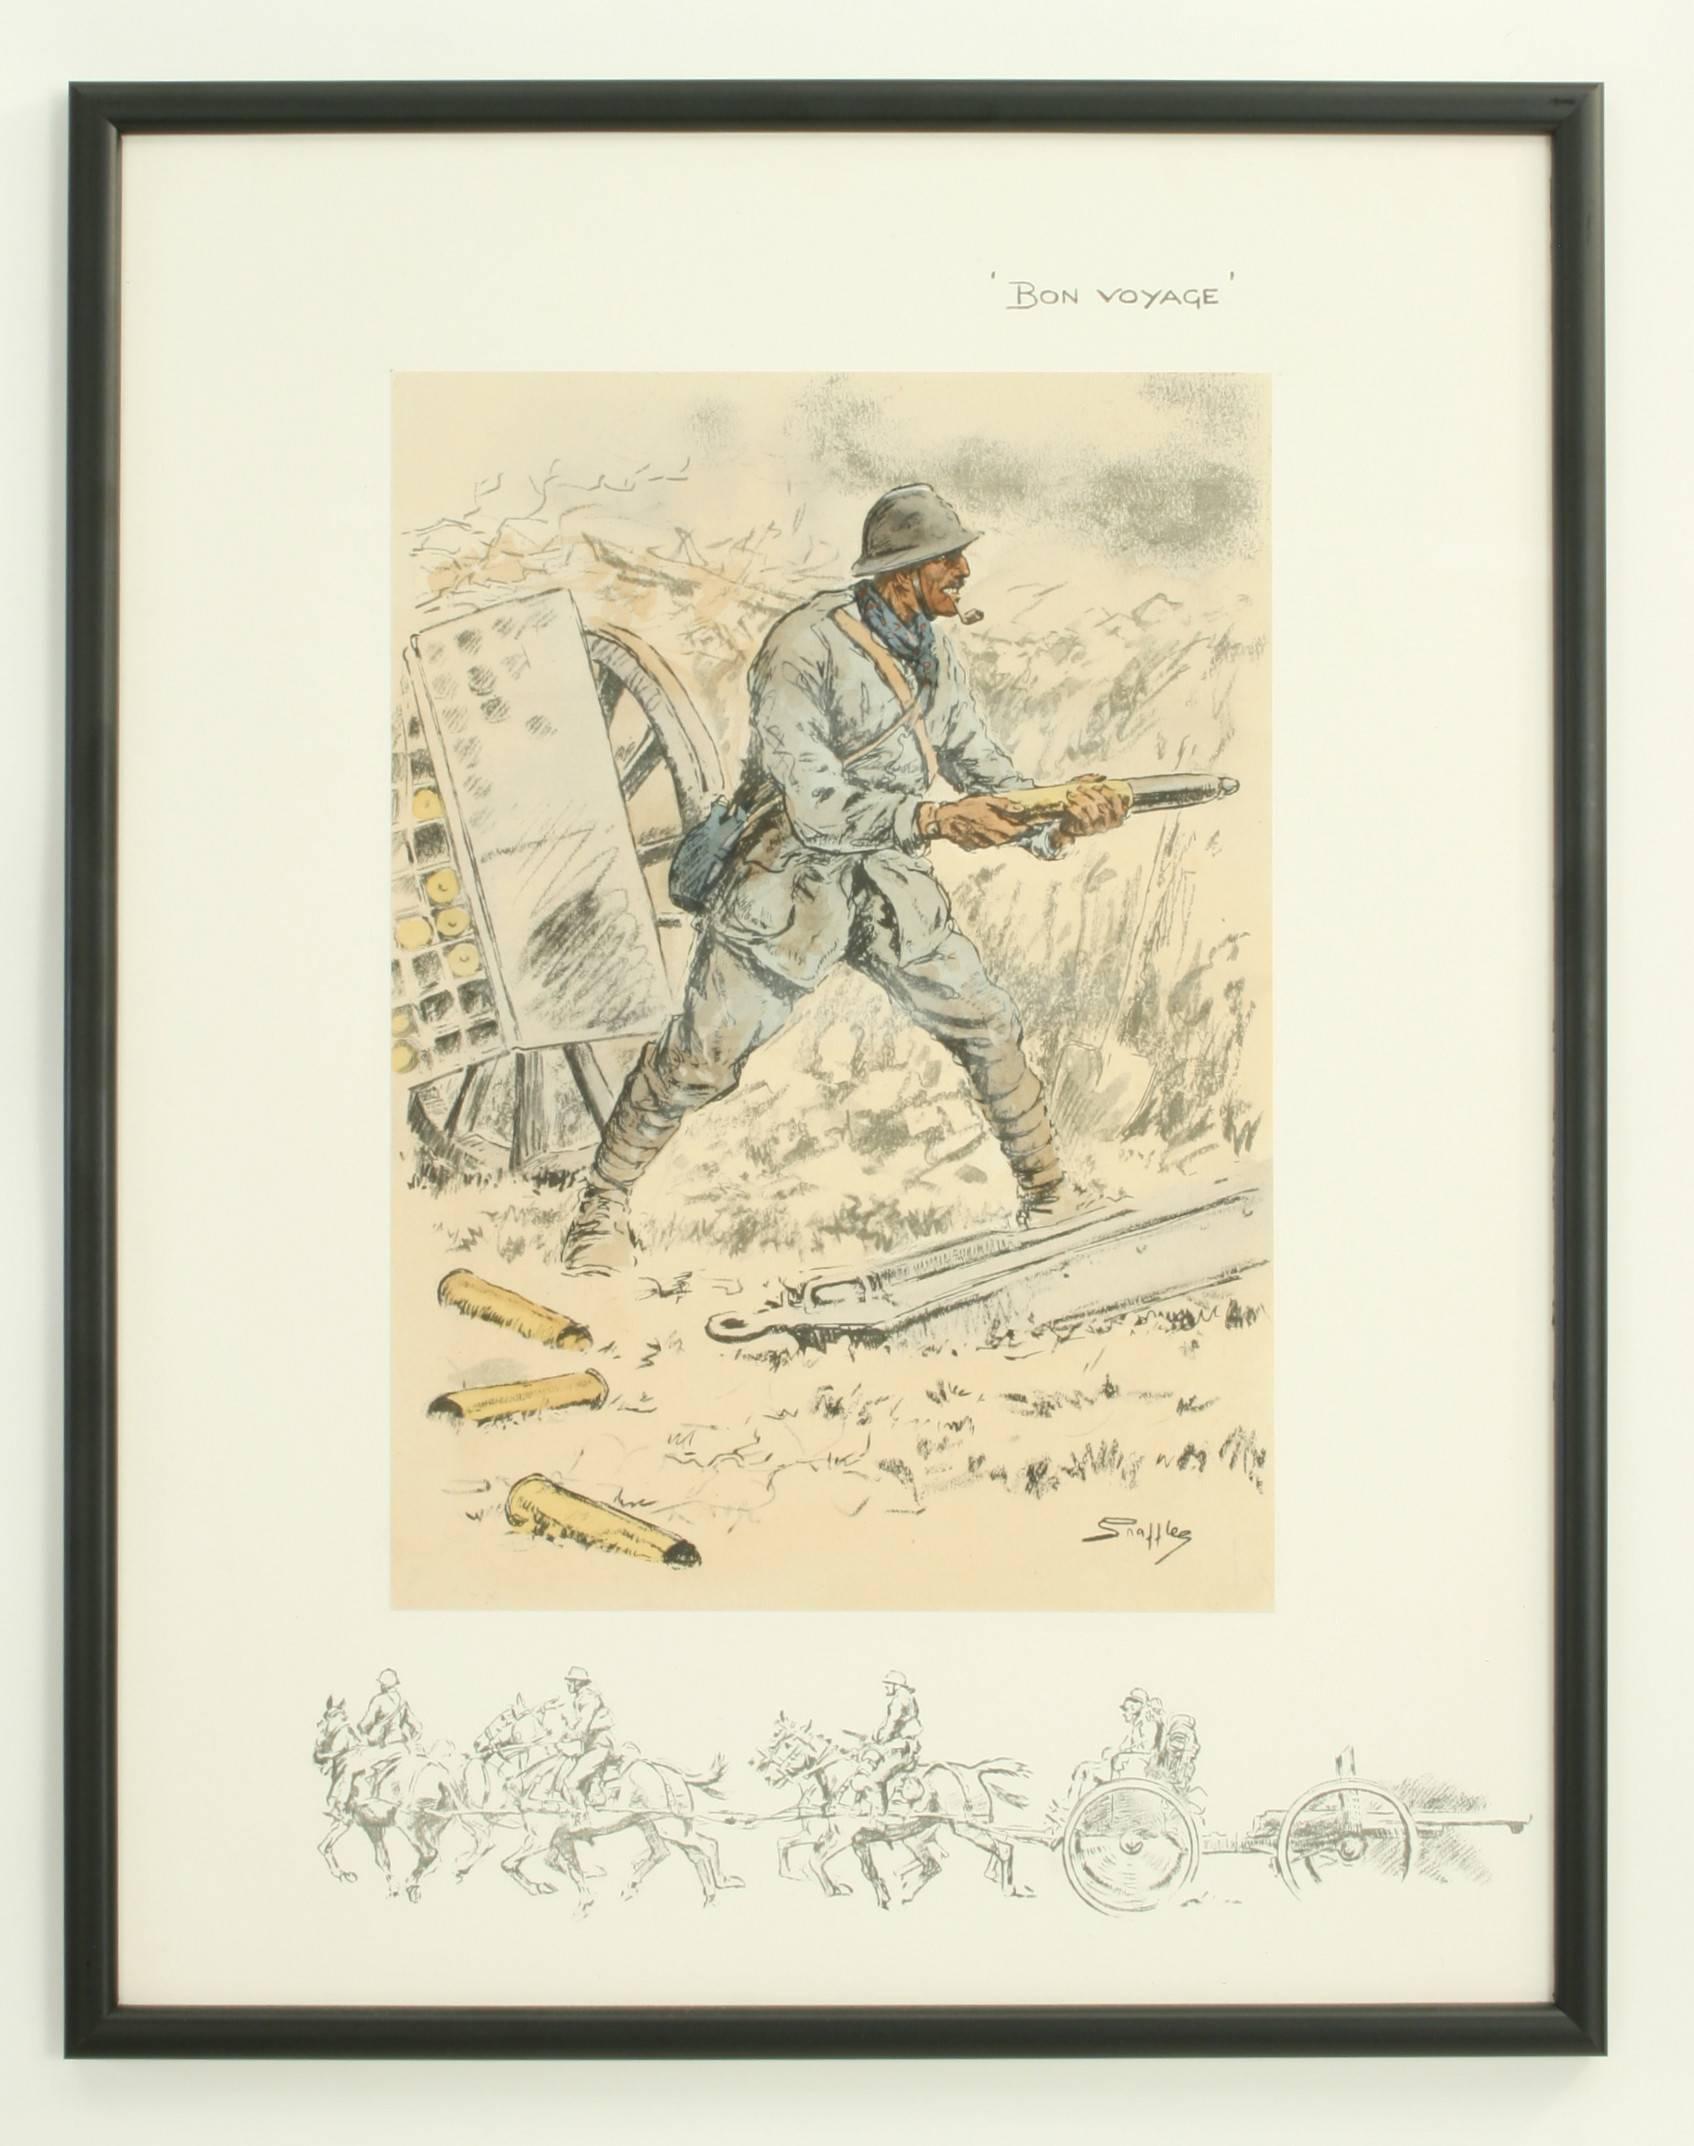 A good Snaffles WWI military print 'Bon Voyage' Snaffles hand colored lithograph. The picture shows a French artillery man holding a shell ready to load it into a gun. In the bottom margin is a remarque depicting a team of six horses pulling a gun.